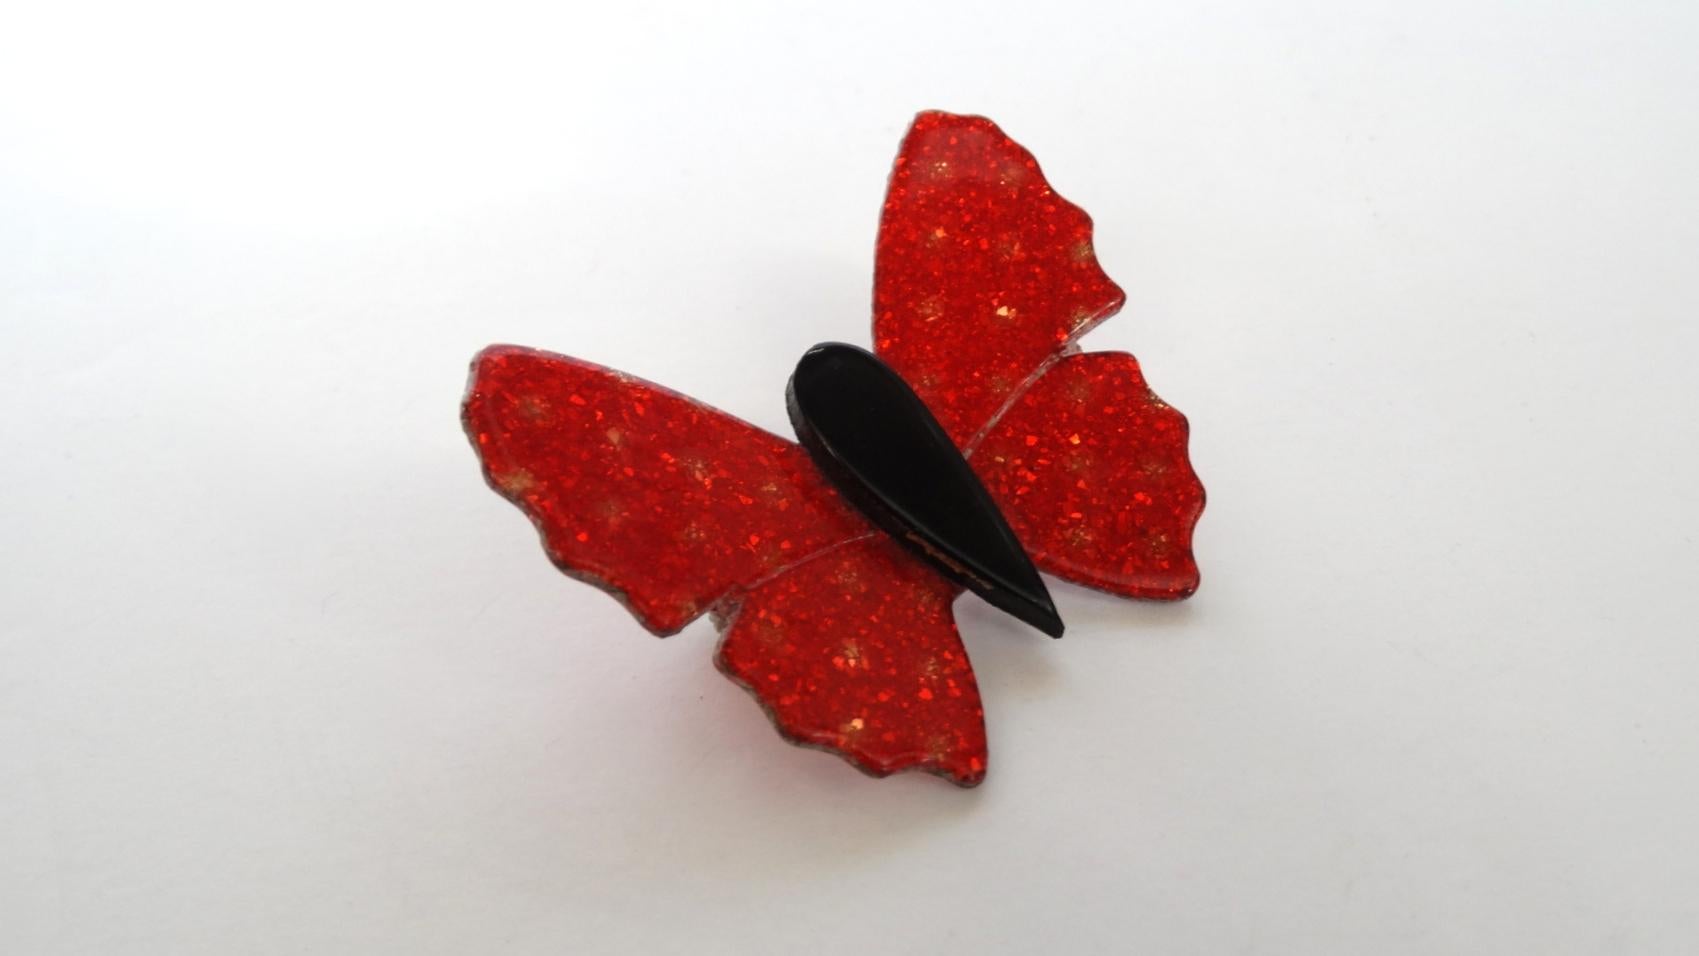 Brooches Are The New Hot Accessory This Season And We've Got You Covered! Circa 1970's, this Lea Stein butterfly brooch features a glitter flake effect in vibrant red and accented with subtle gold dots. A black tear drop shaped body adds dimension